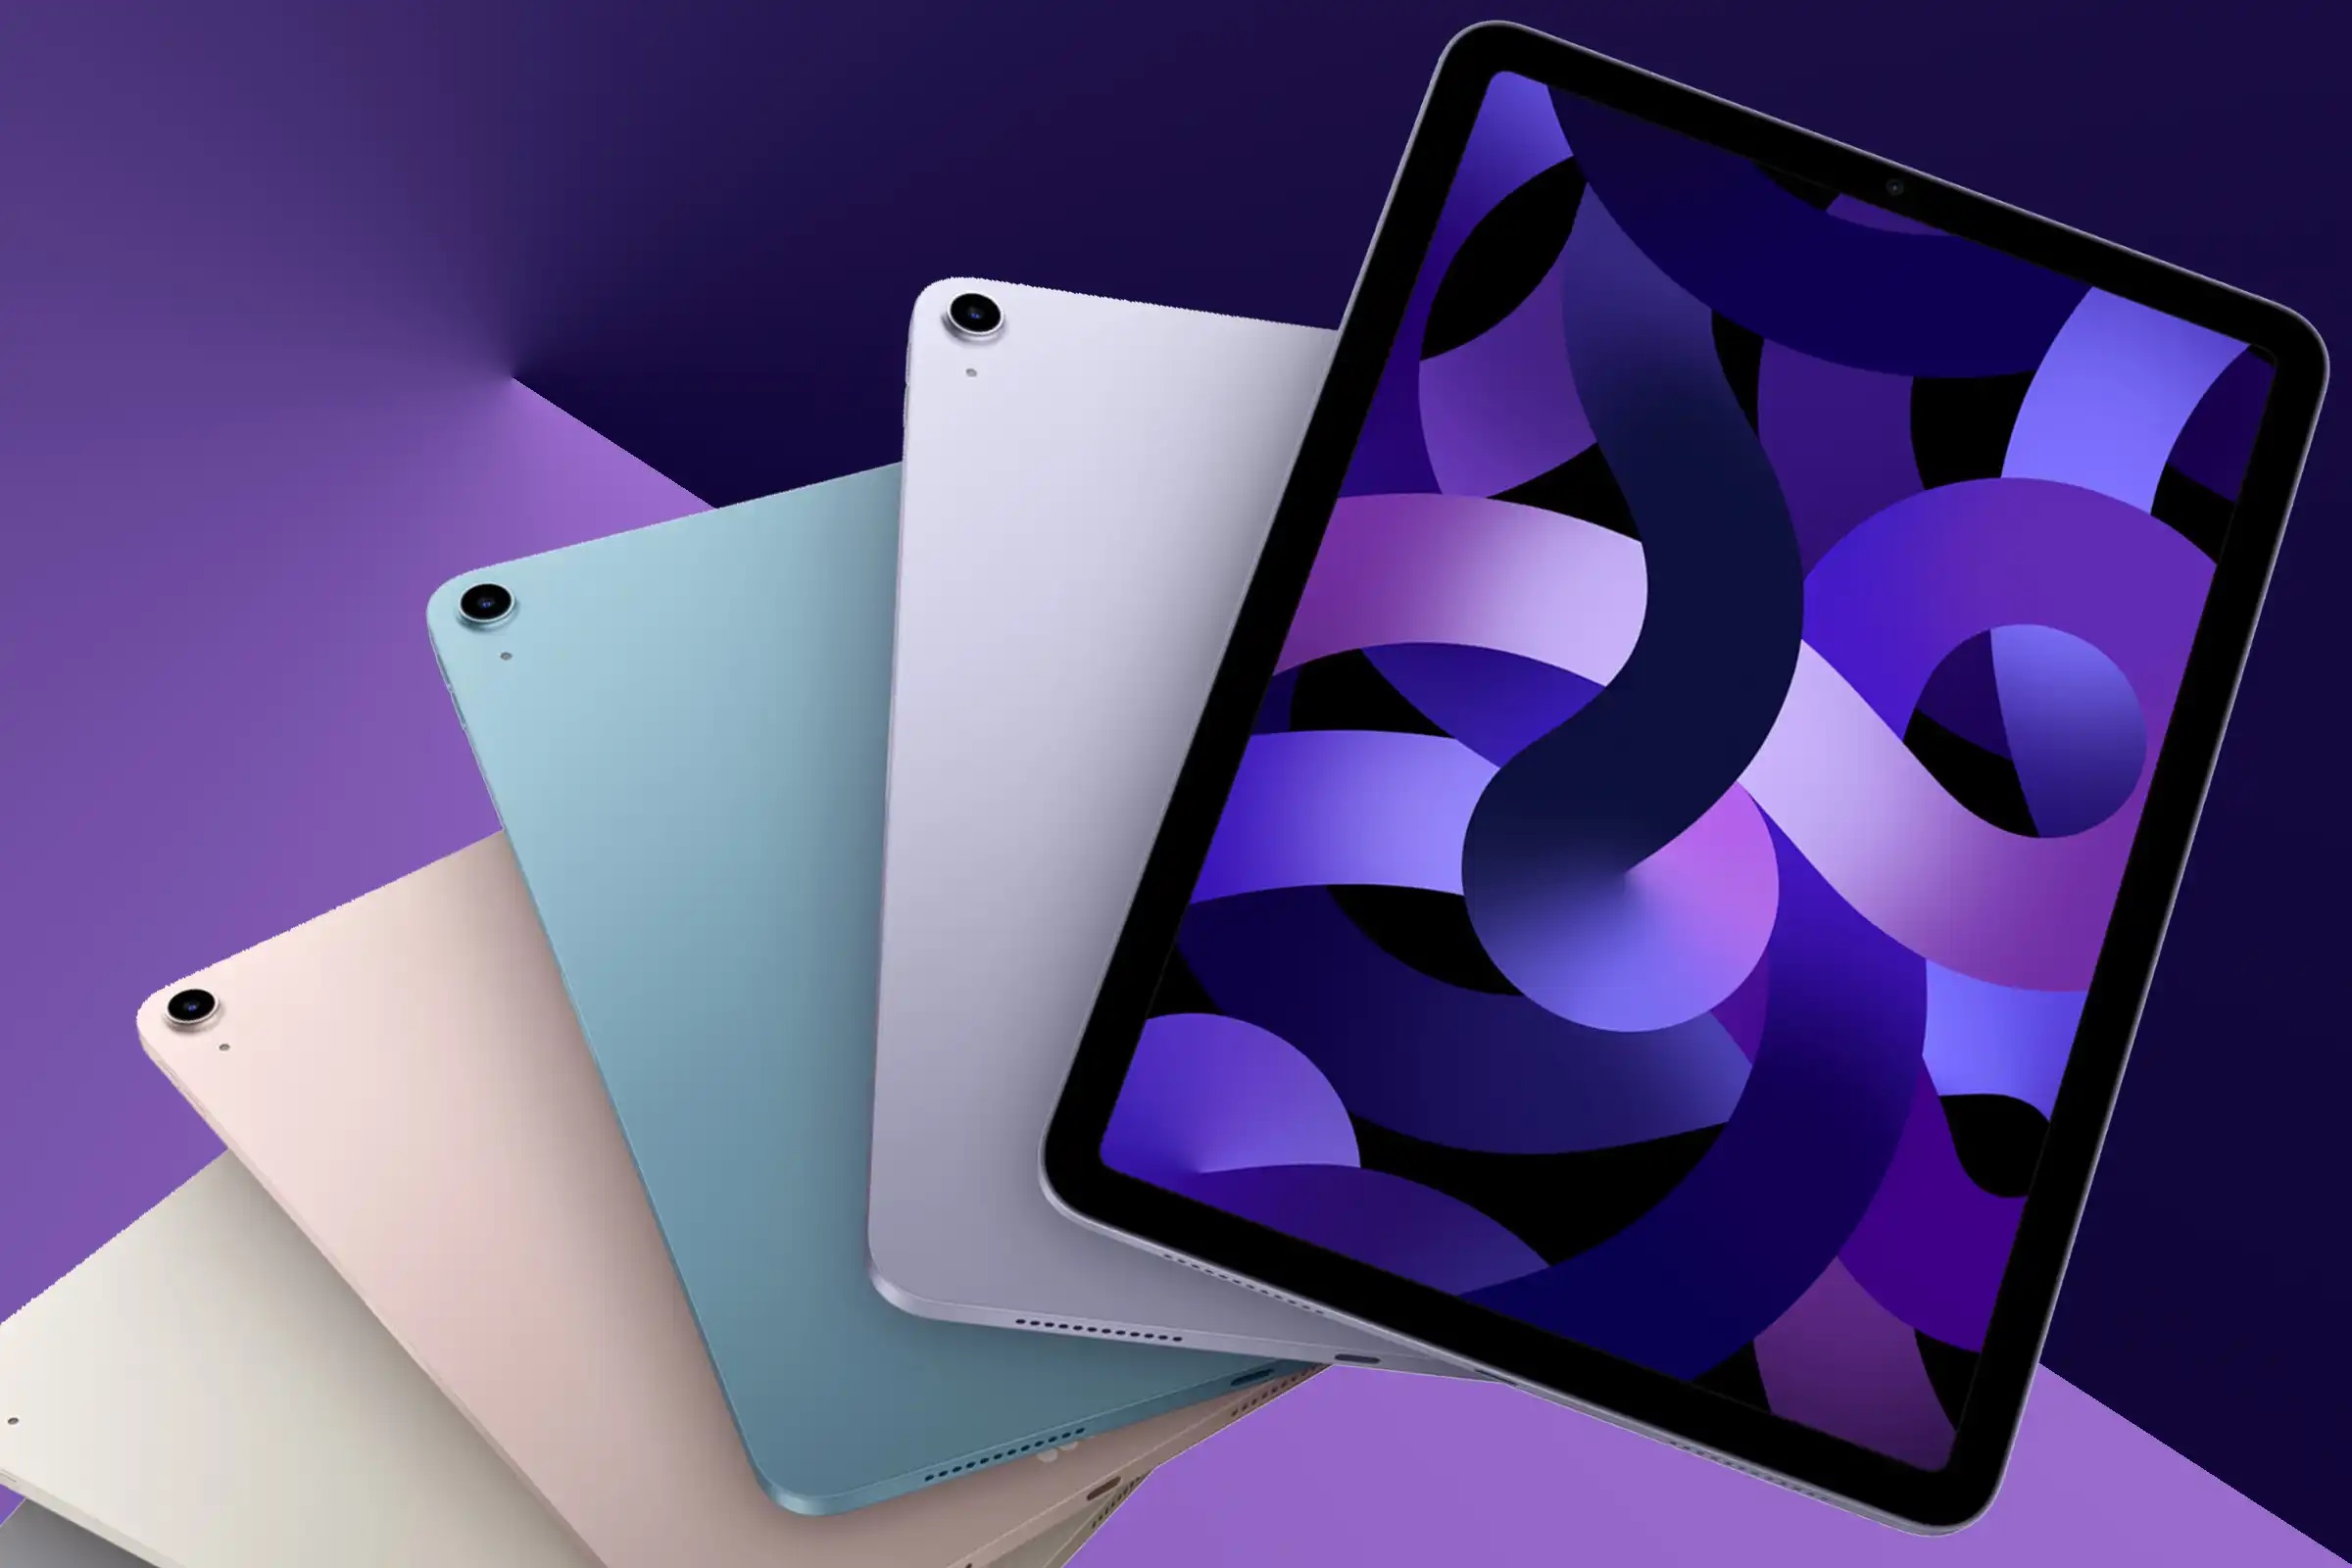 Apple has certified two new iPad models ahead of a May announcement